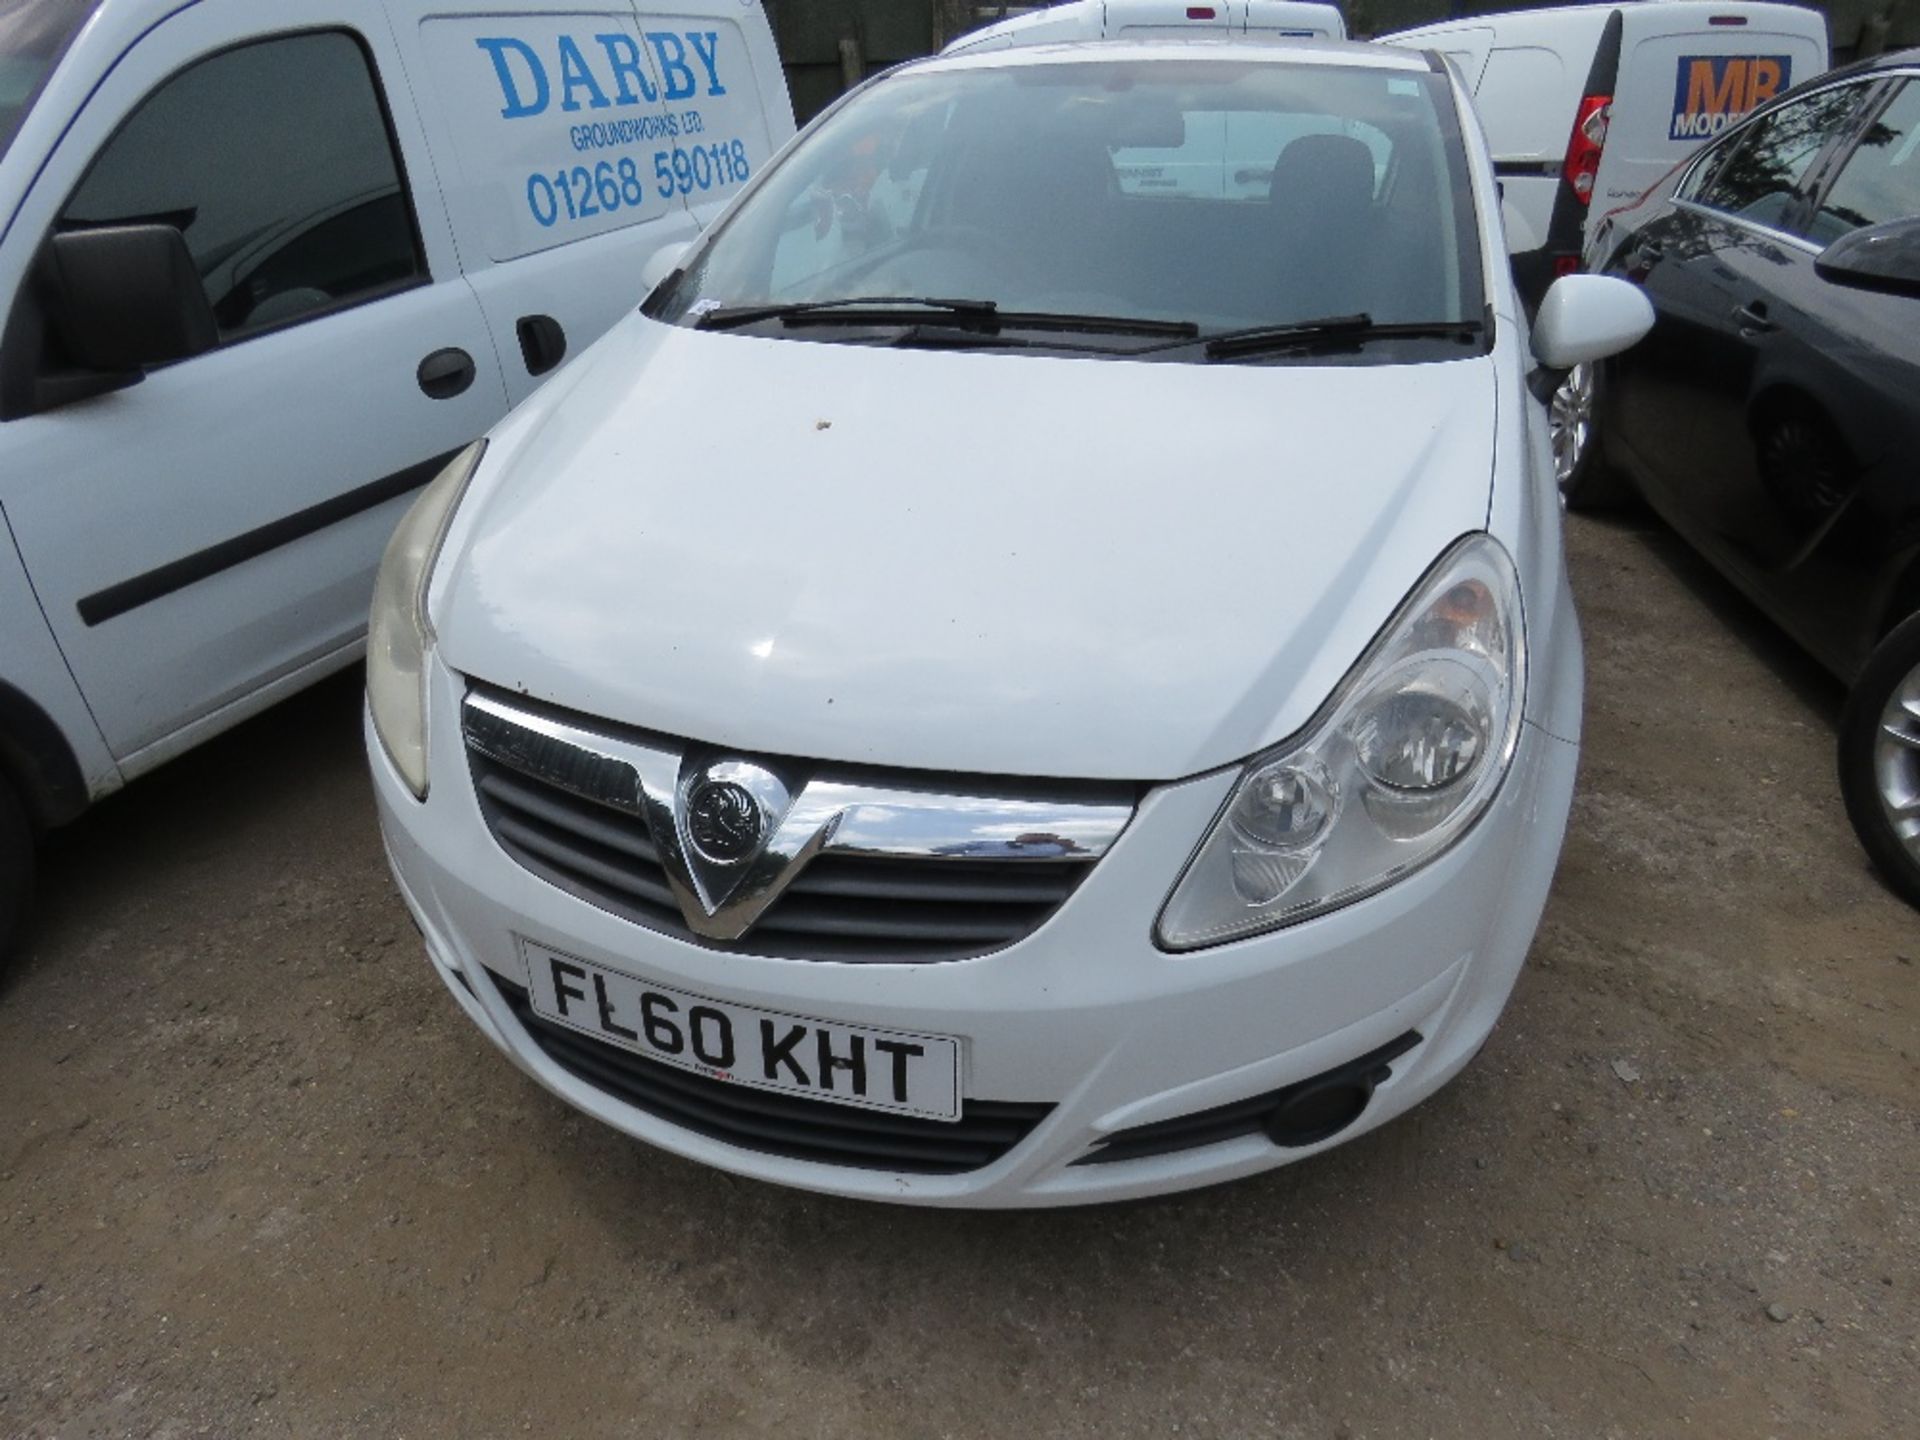 VAUXHALL CORSA PANEL VAN REG:FL60 KHT. 147,402 REC MILES. WHEN TESTED WAS SEEN TO START, DRIVE, - Image 2 of 9